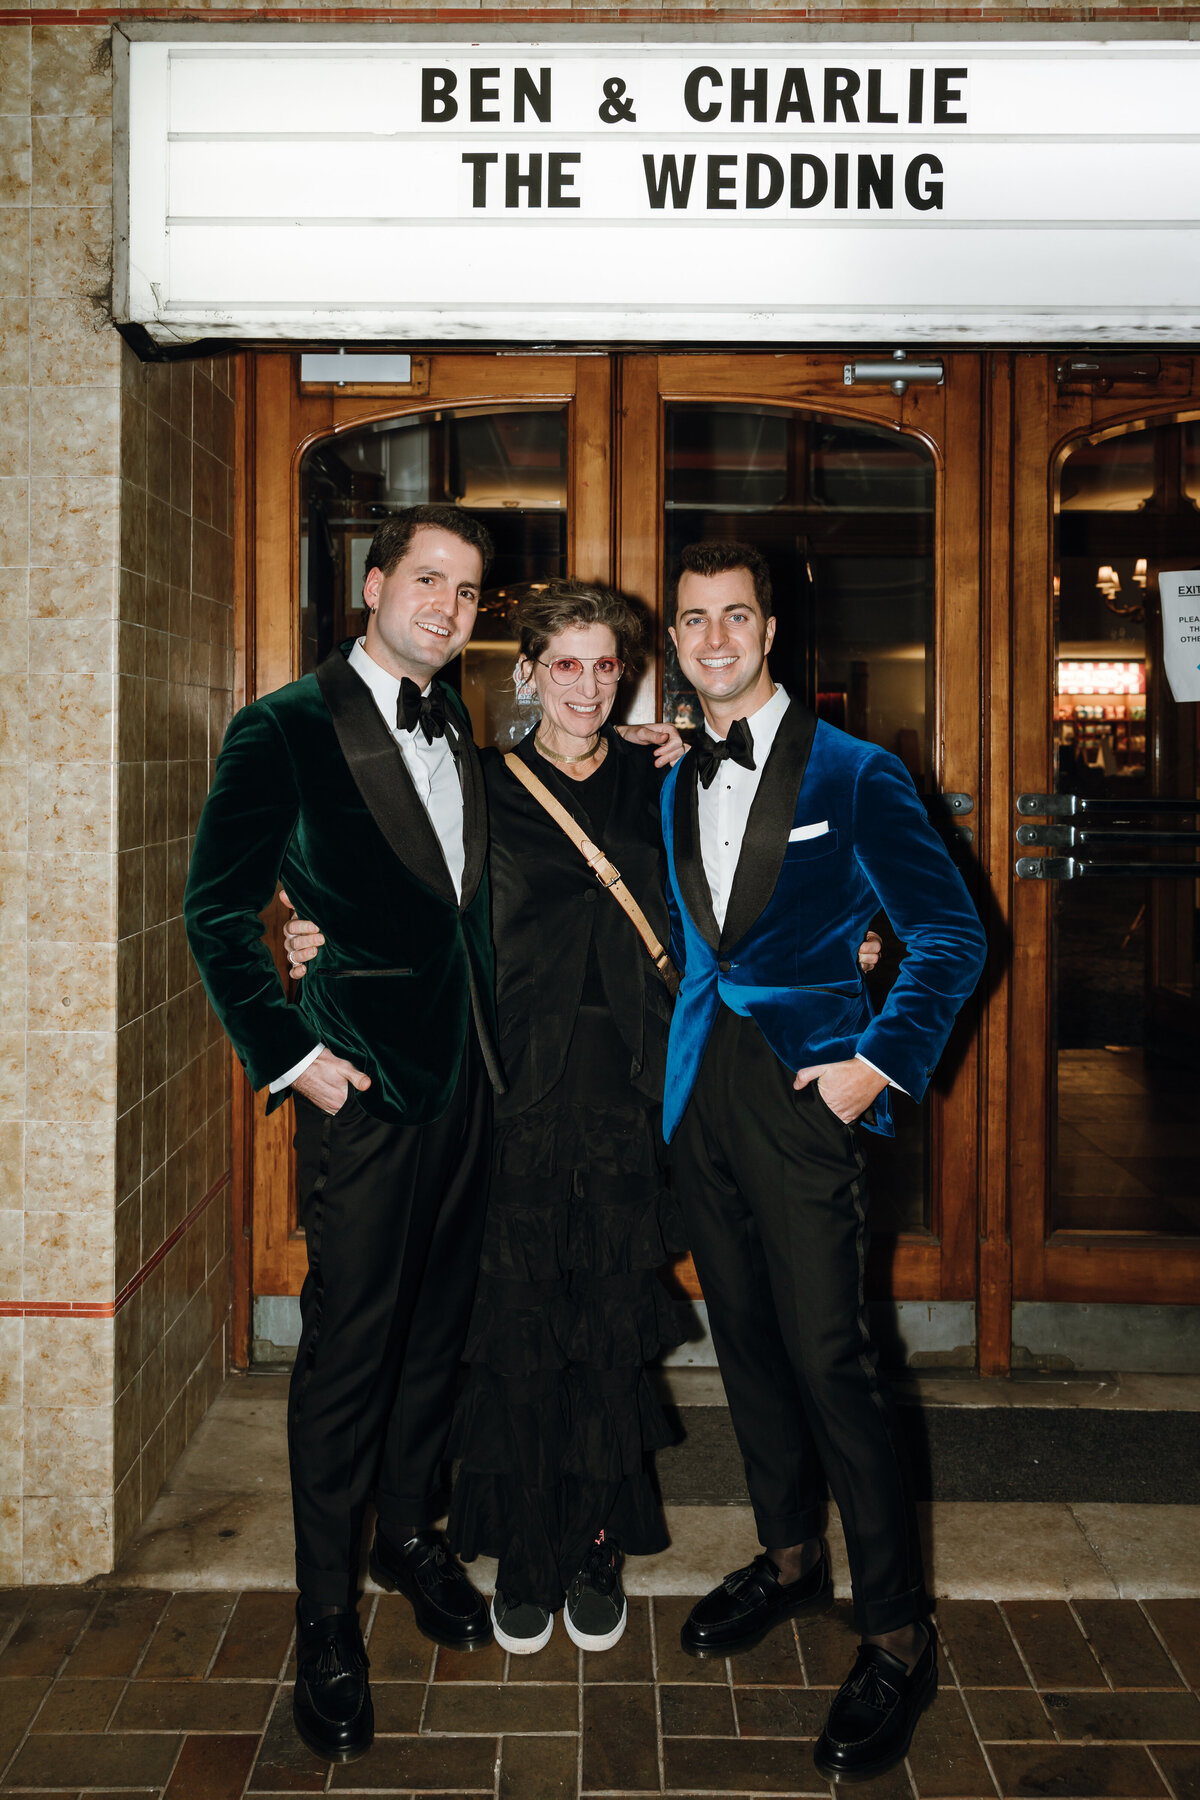 The grooms in green and blue velvet suits outside the entrance of regal cinema with a guest in between them.